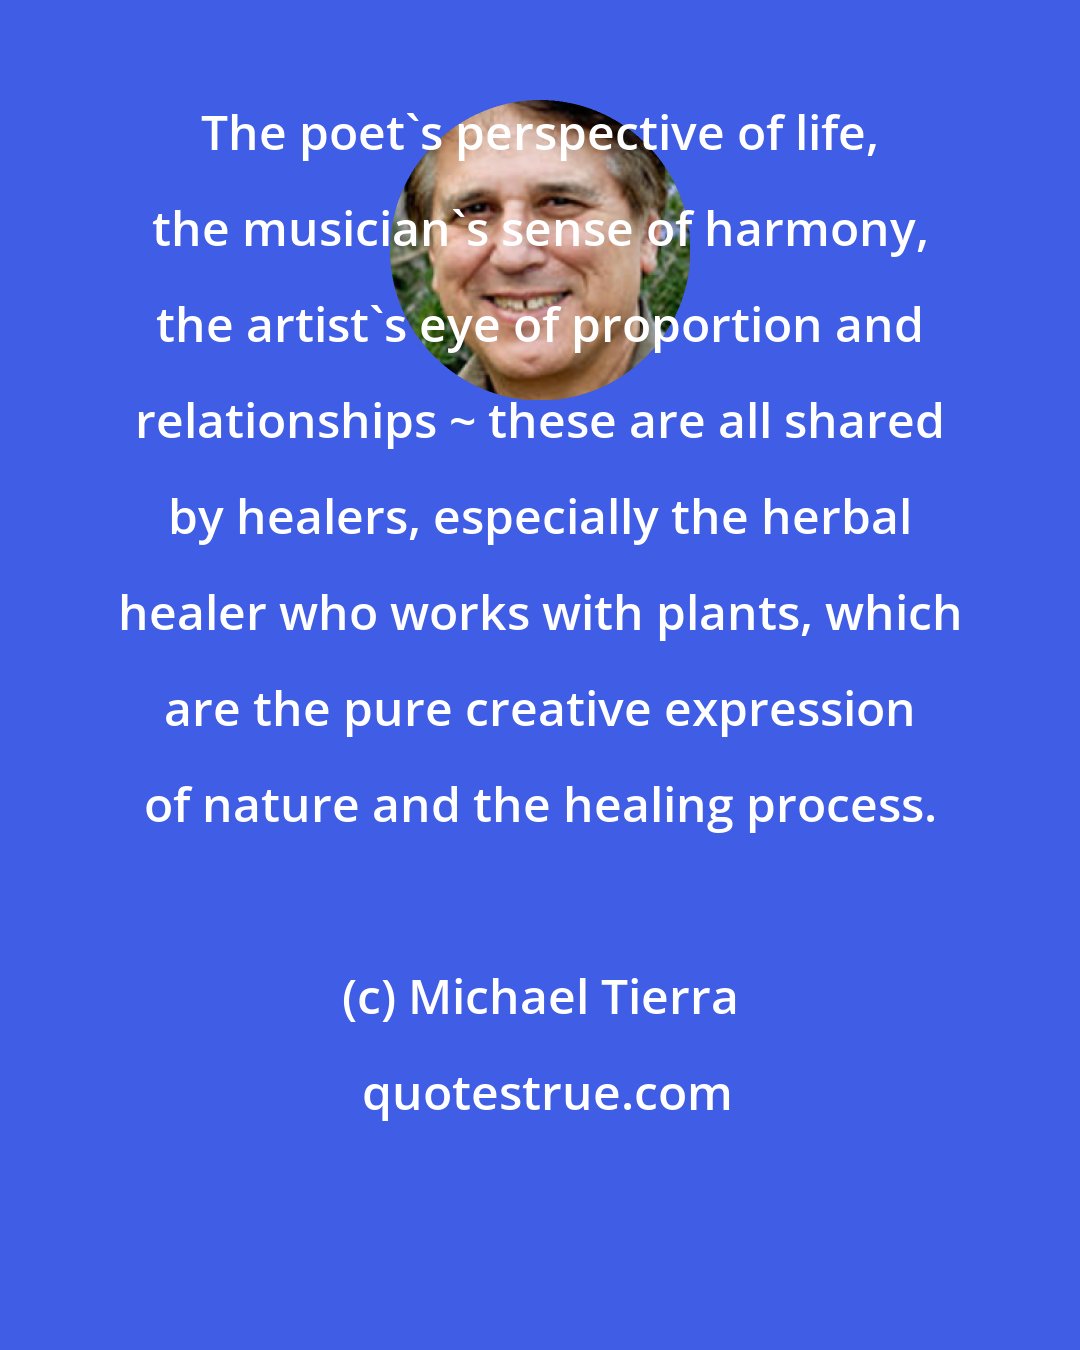 Michael Tierra: The poet's perspective of life, the musician's sense of harmony, the artist's eye of proportion and relationships ~ these are all shared by healers, especially the herbal healer who works with plants, which are the pure creative expression of nature and the healing process.